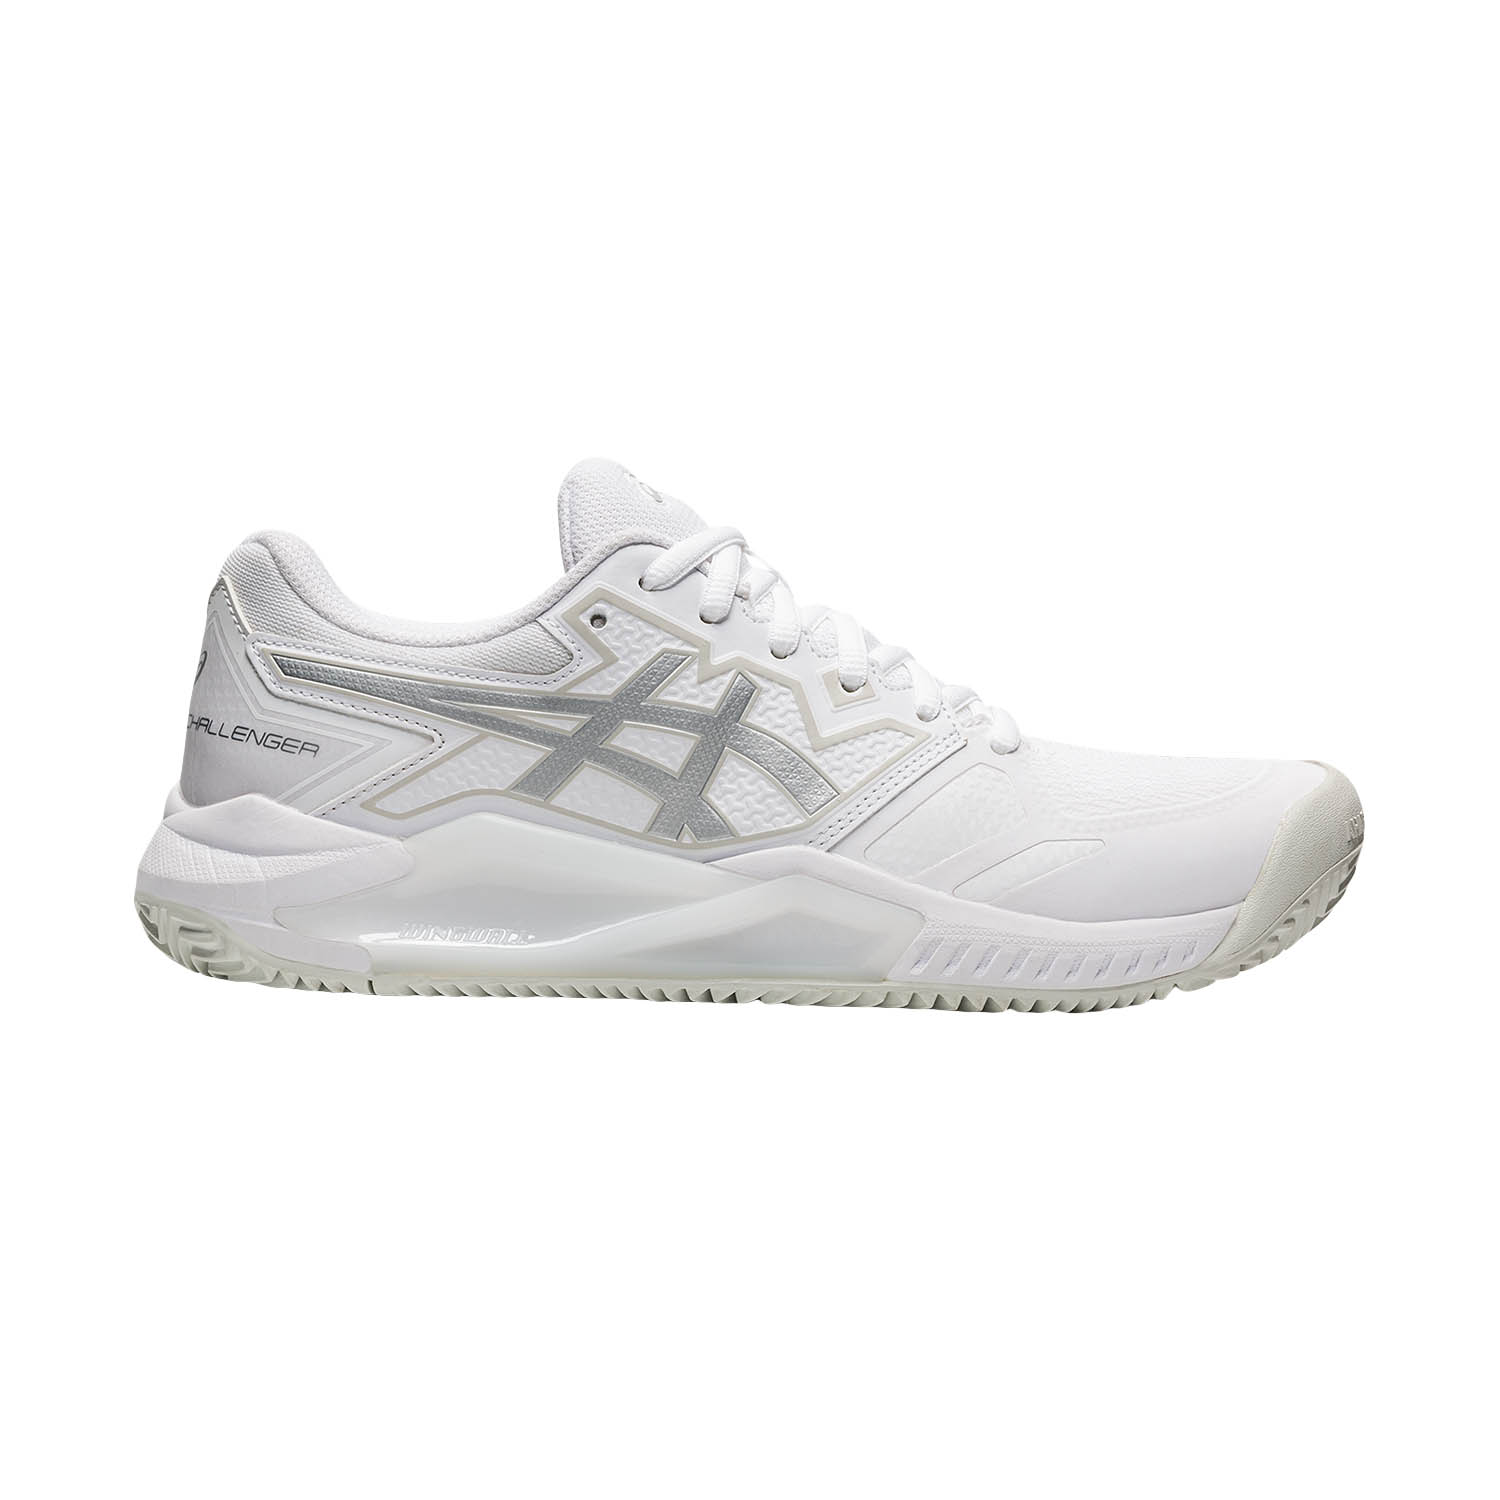 Asics Gel Challenger 13 Clay Women's Tennis Shoes - White